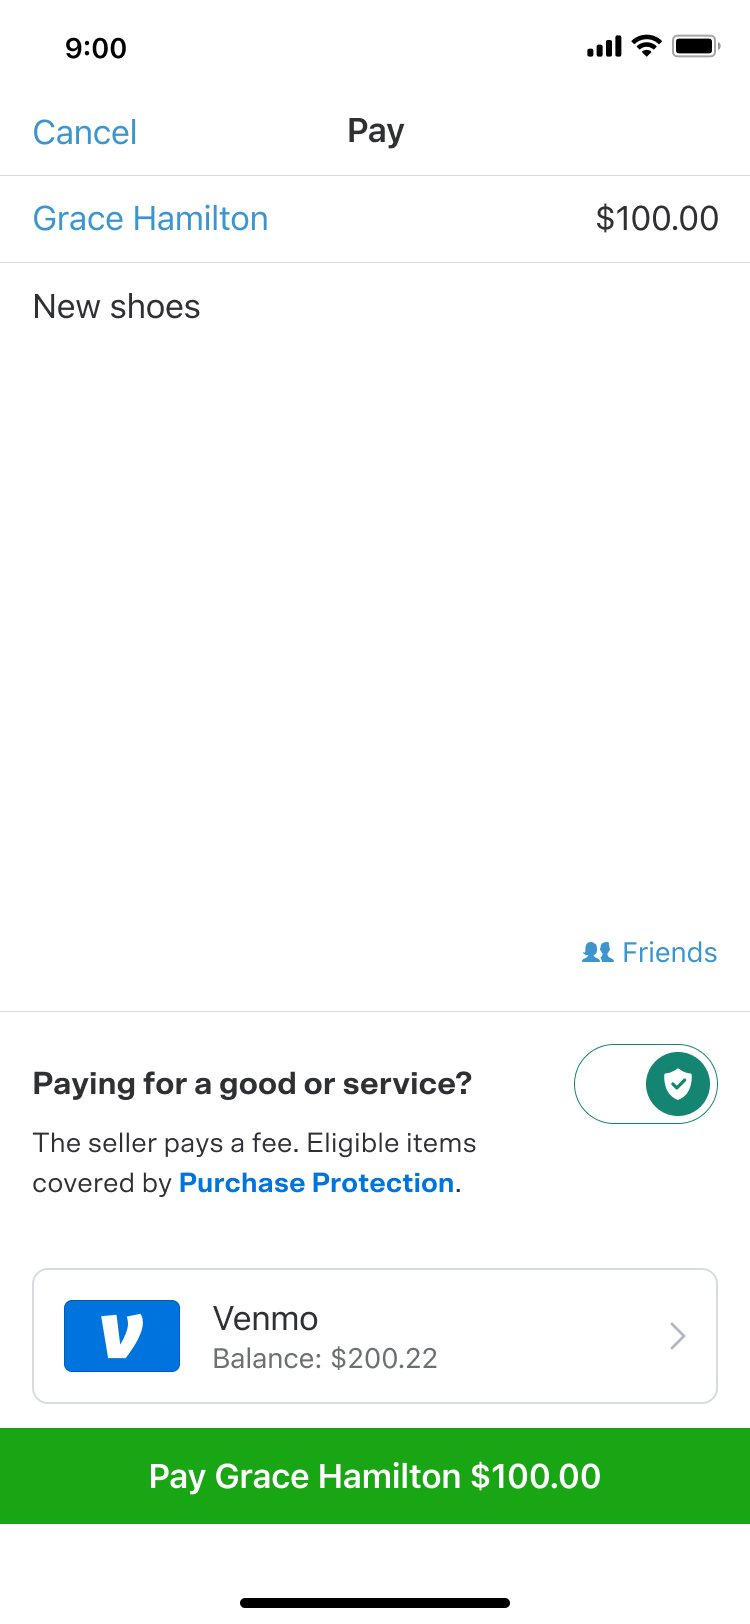 Paying for goods and services with Venmo